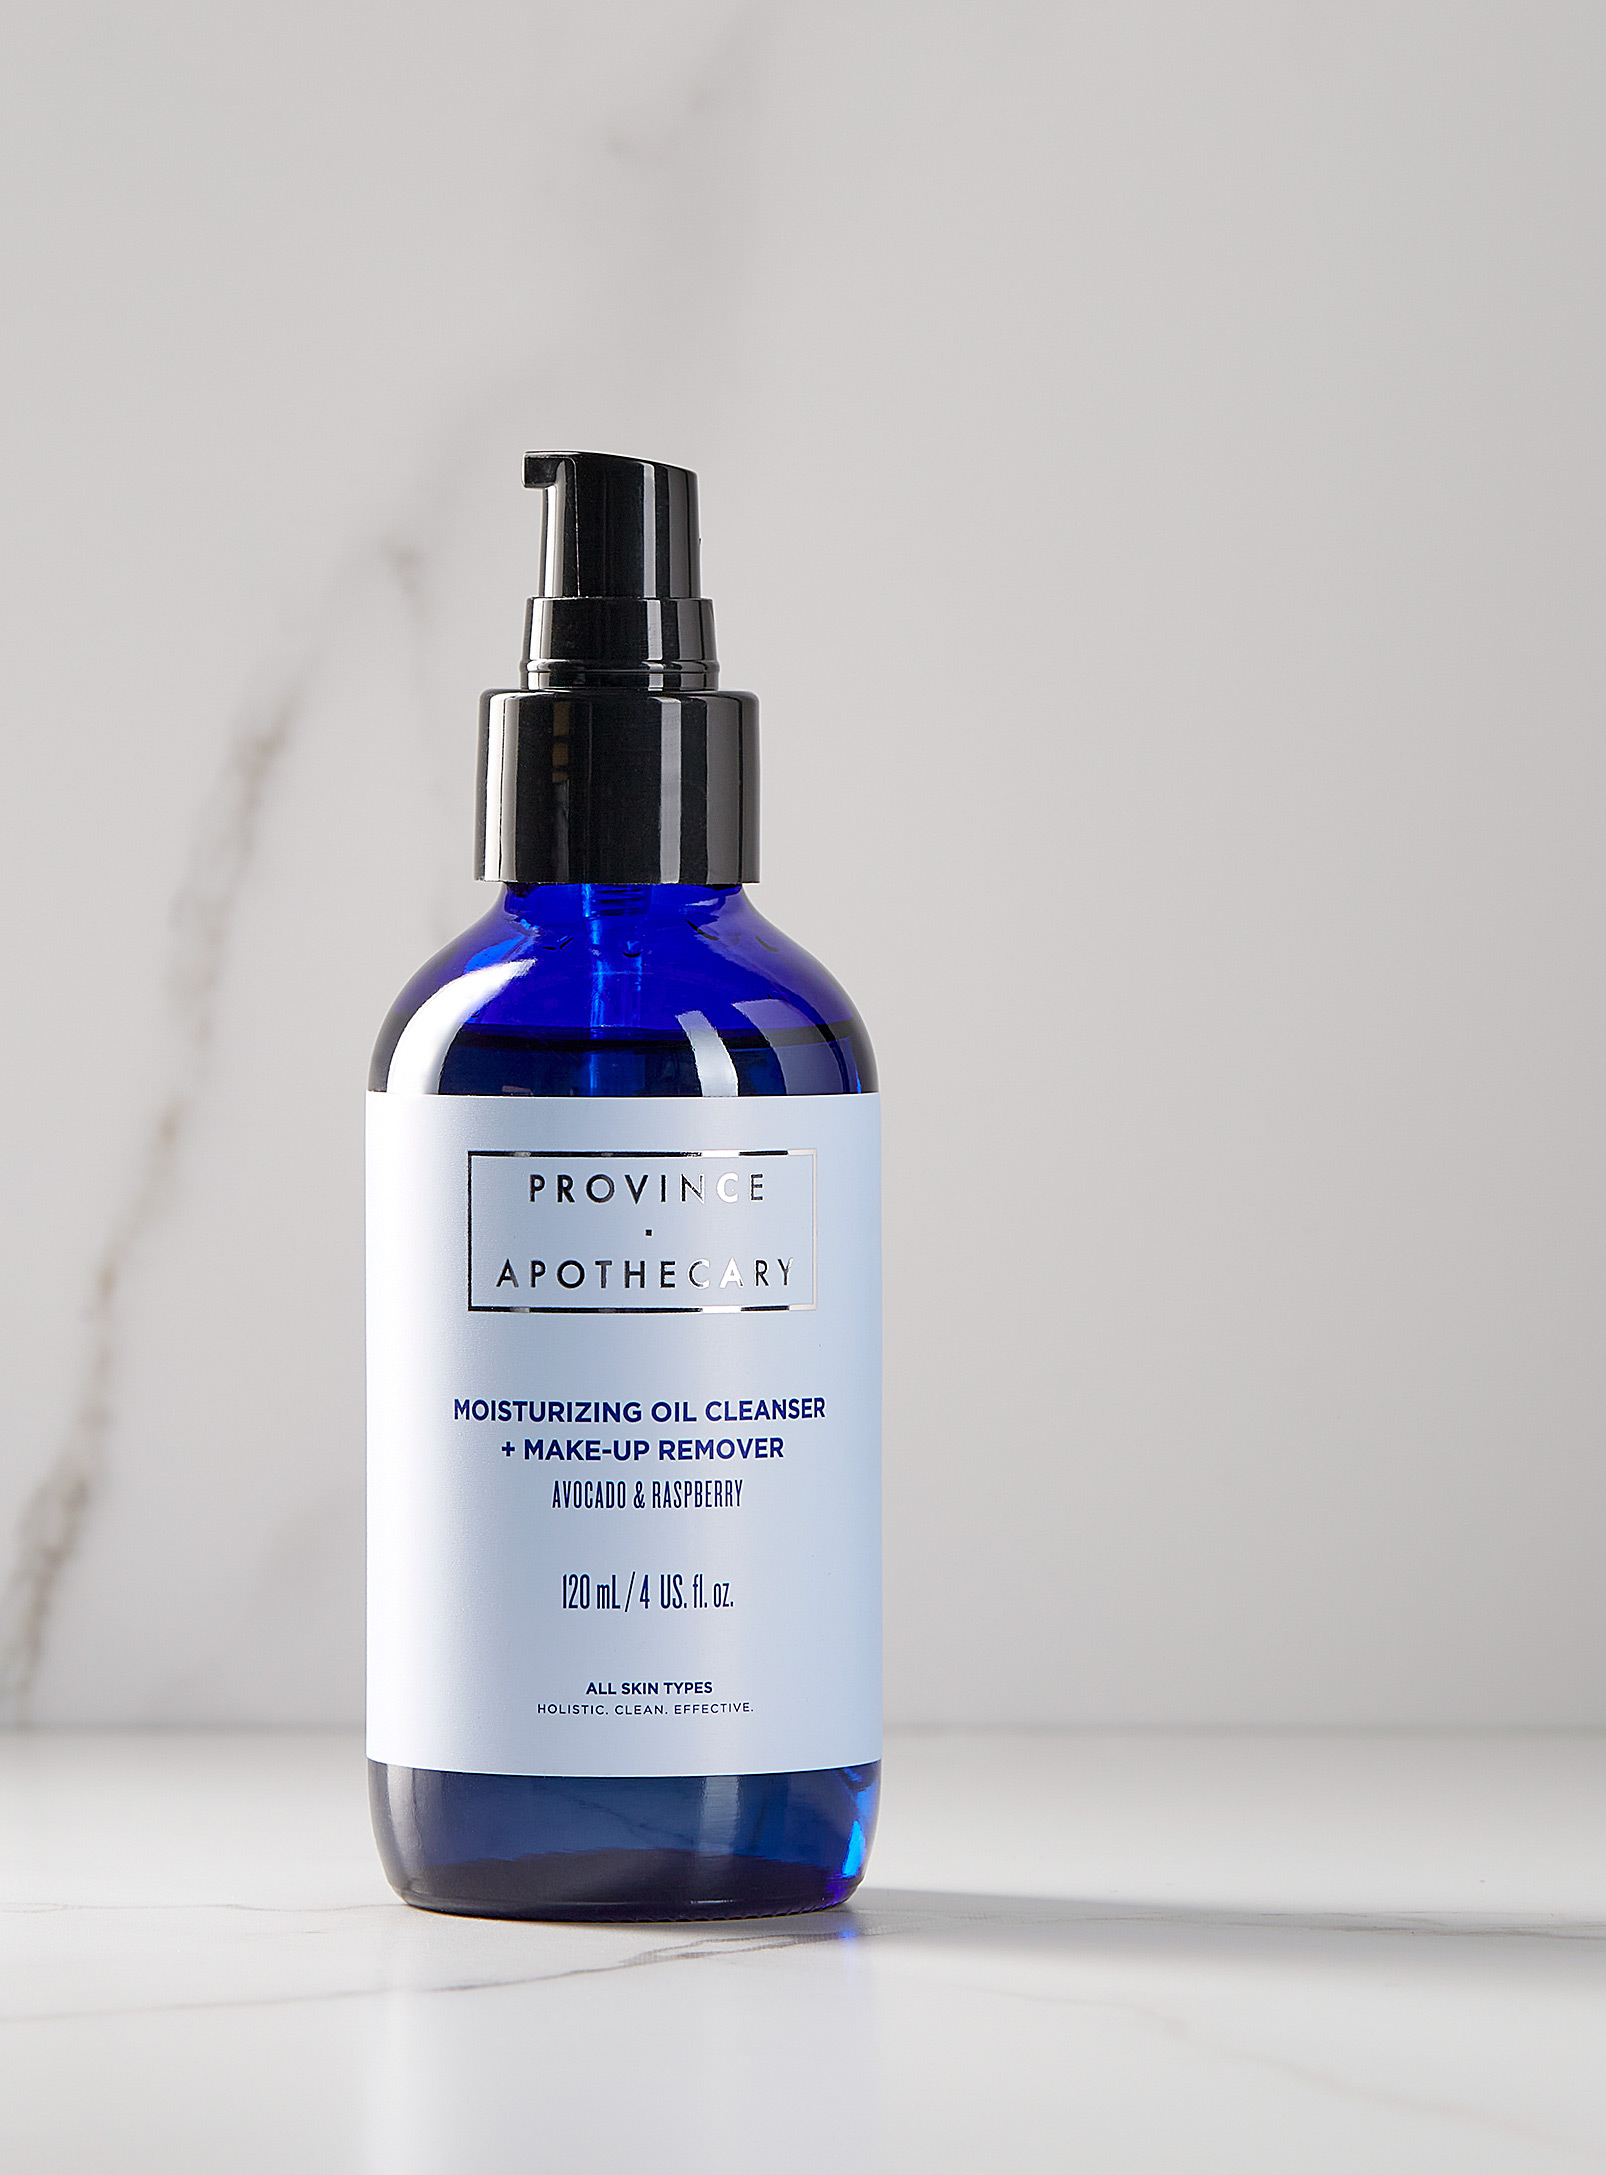 Province Apothecary - Moisturizing cleanser and make-up remover